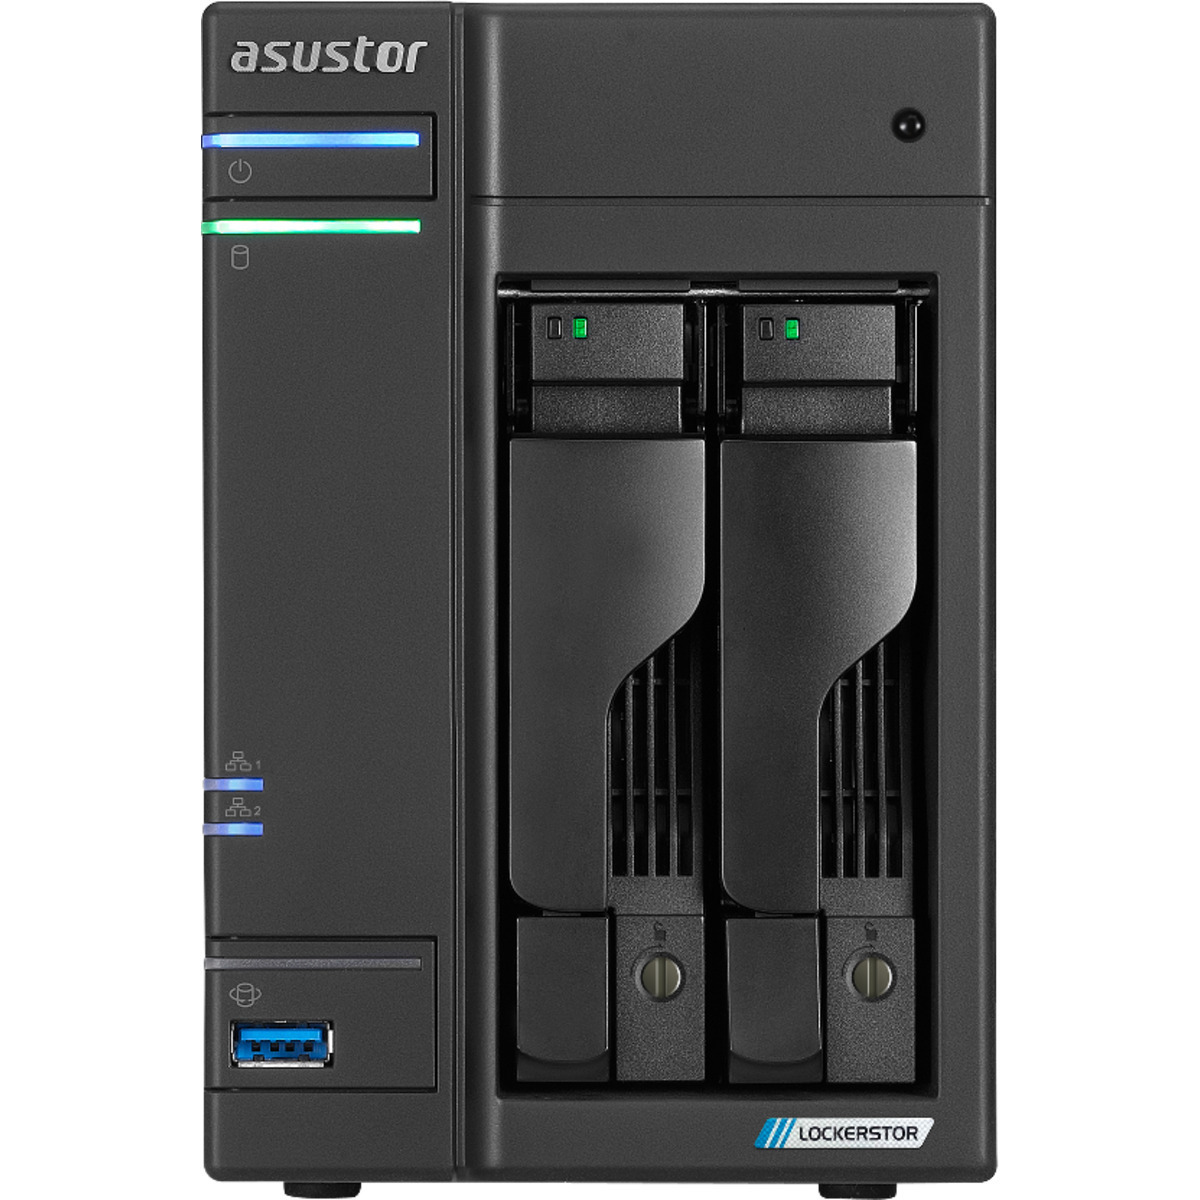 buy $1657 ASUSTOR LOCKERSTOR 2 Gen2 AS6702T 44tb Desktop NAS - Network Attached Storage Device 2x22000gb Seagate IronWolf Pro ST22000NT001 3.5 7200rpm SATA 6Gb/s HDD NAS Class Drives Installed - Burn-In Tested - FREE RAM UPGRADE - nas headquarters buy network attached storage server device das new raid-5 free shipping simply usa LOCKERSTOR 2 Gen2 AS6702T